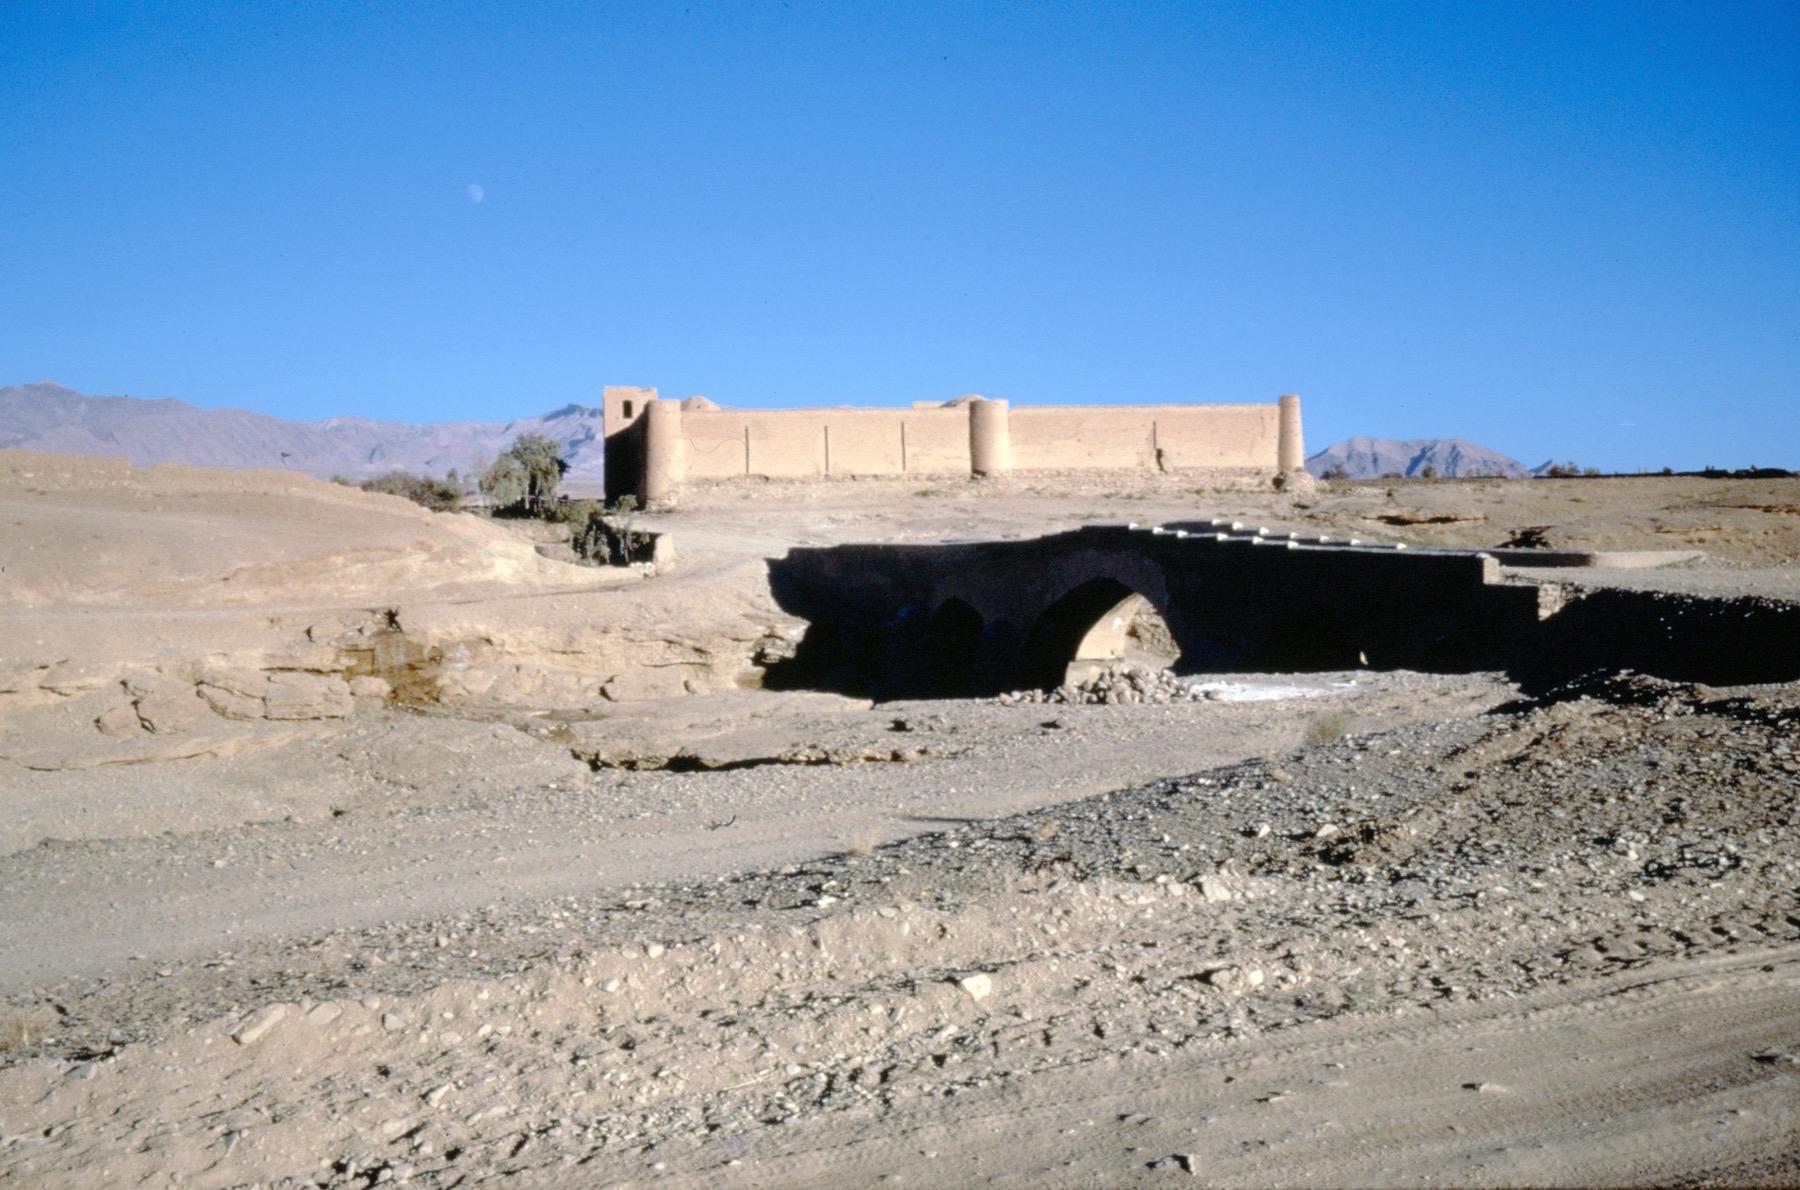 General view showing the bridge in foreground and the caravanserai in background